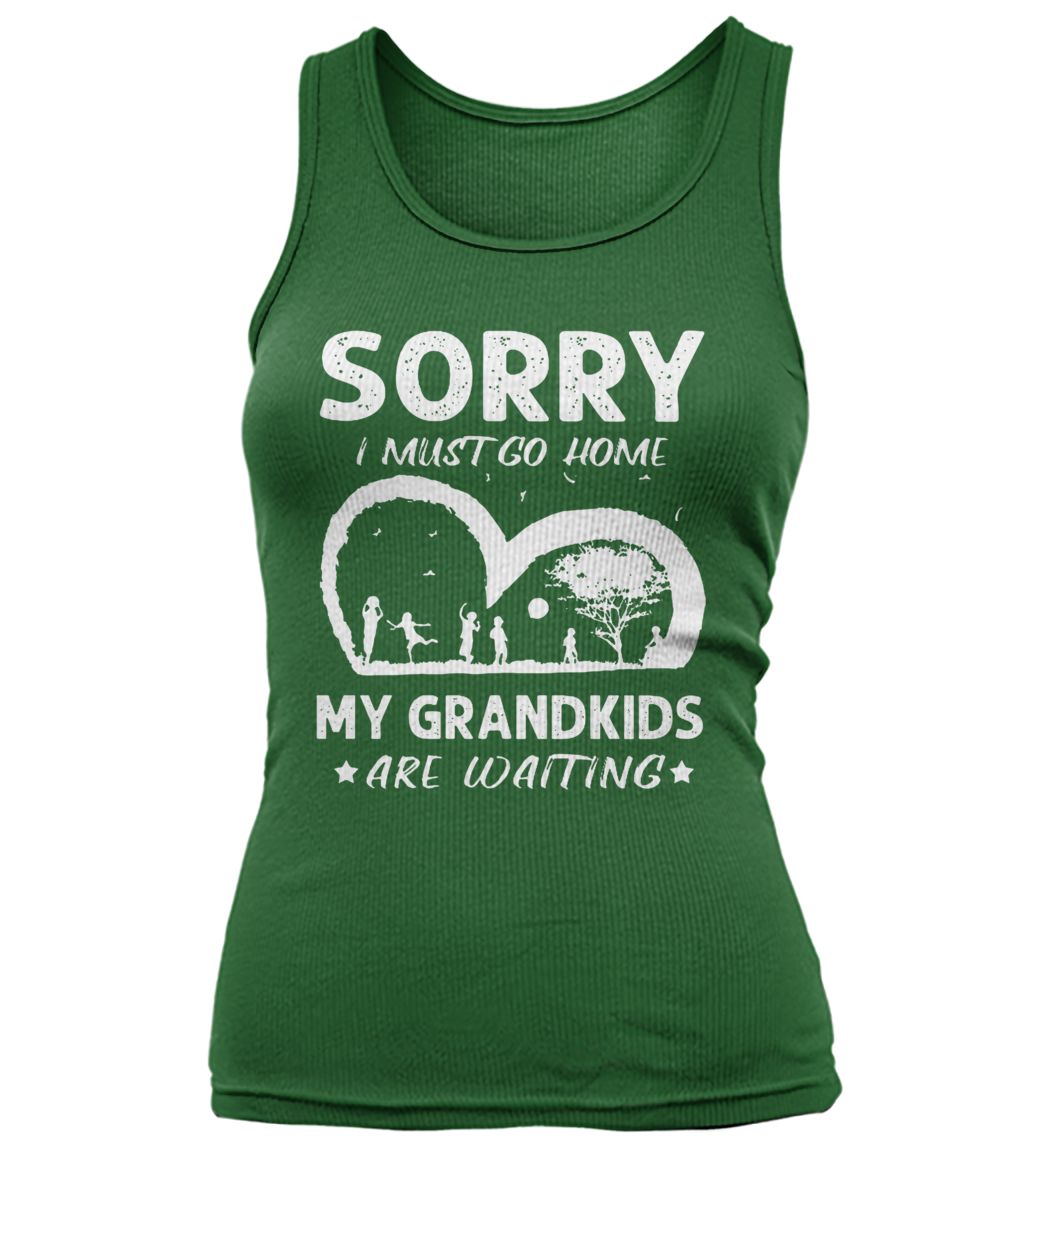 Sorry I must go home my grandkids are waiting women's tank top